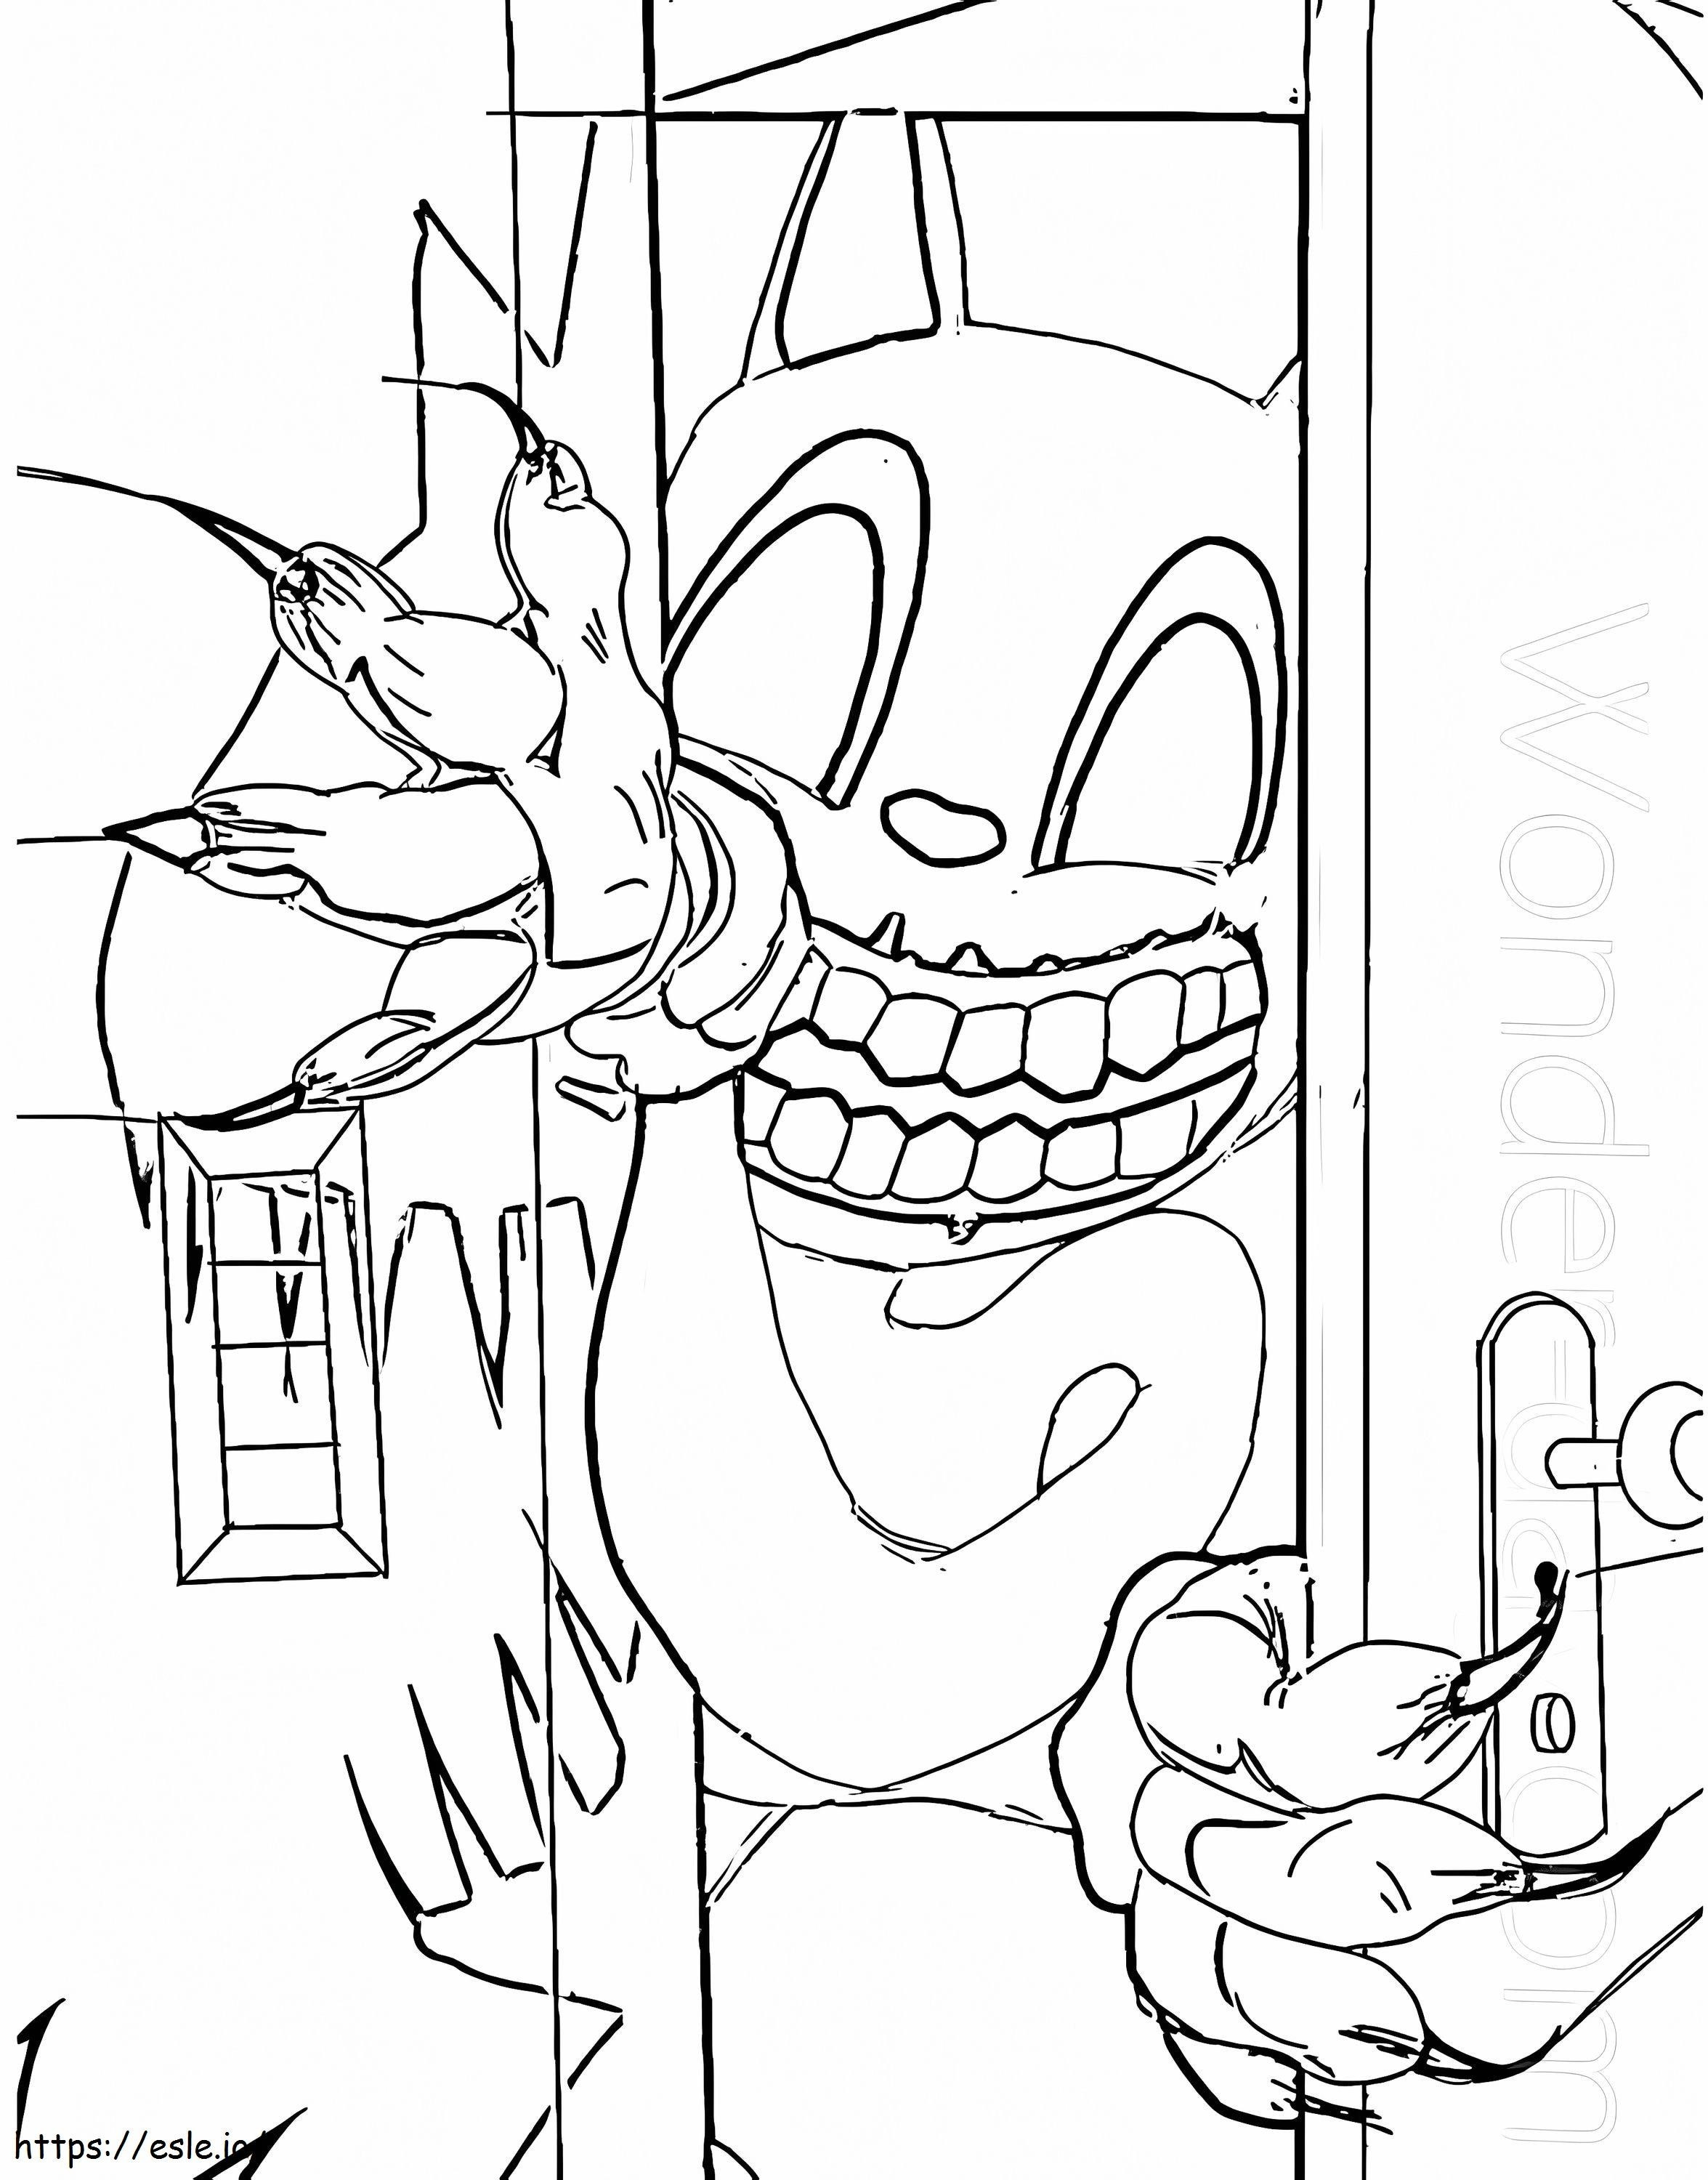 Scary Cartoon Cat coloring page